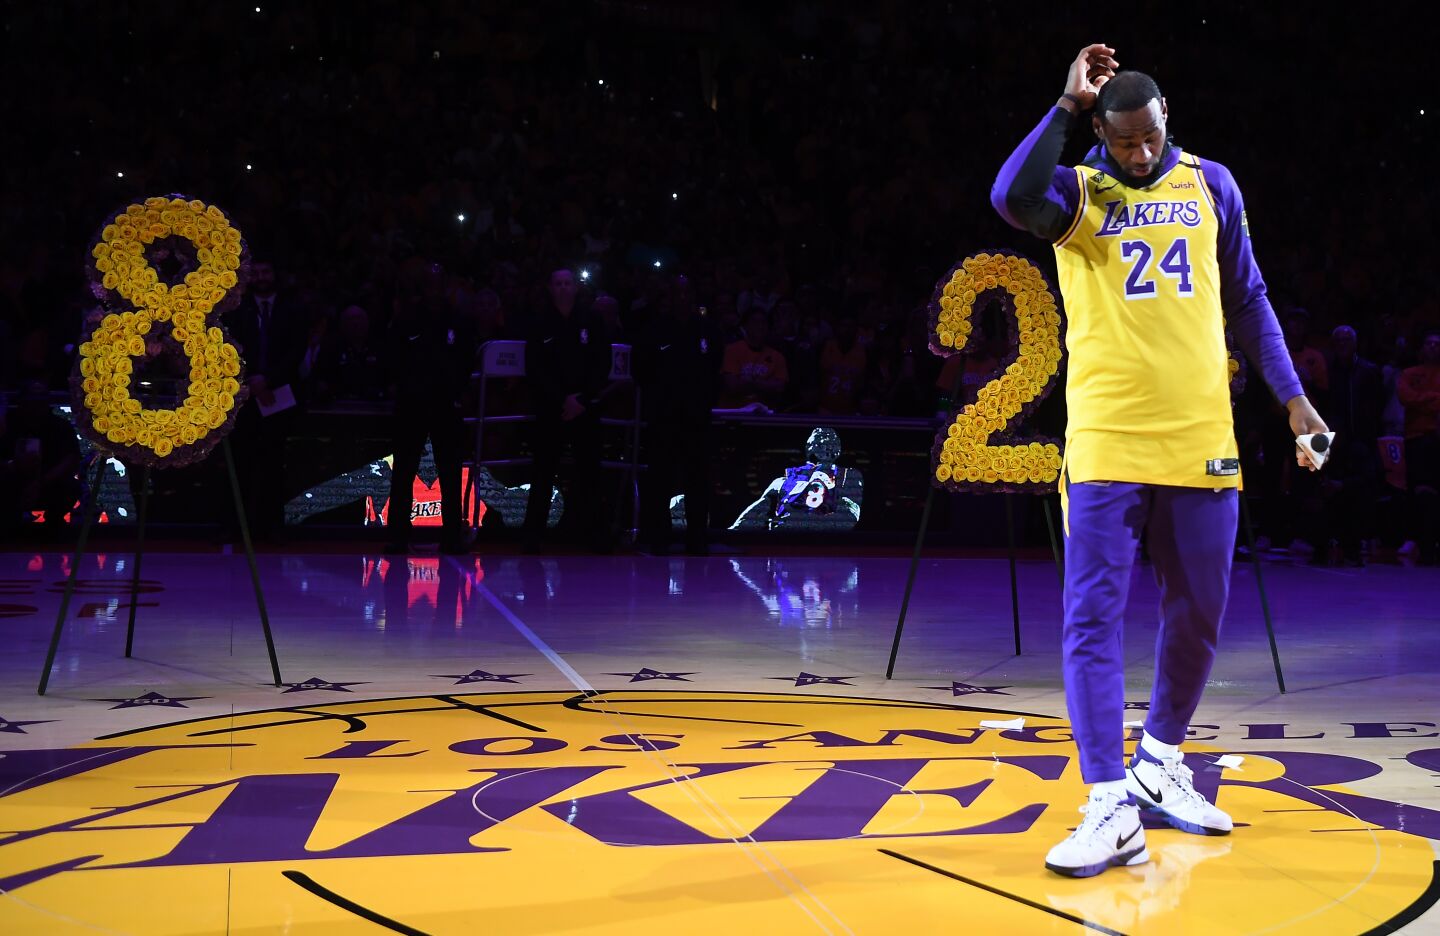 LeBron James speaks to the crowd at Staples Center during a ceremony honoring the life of Kobe Bryant at Staples Center on Jan. 31, 2020.